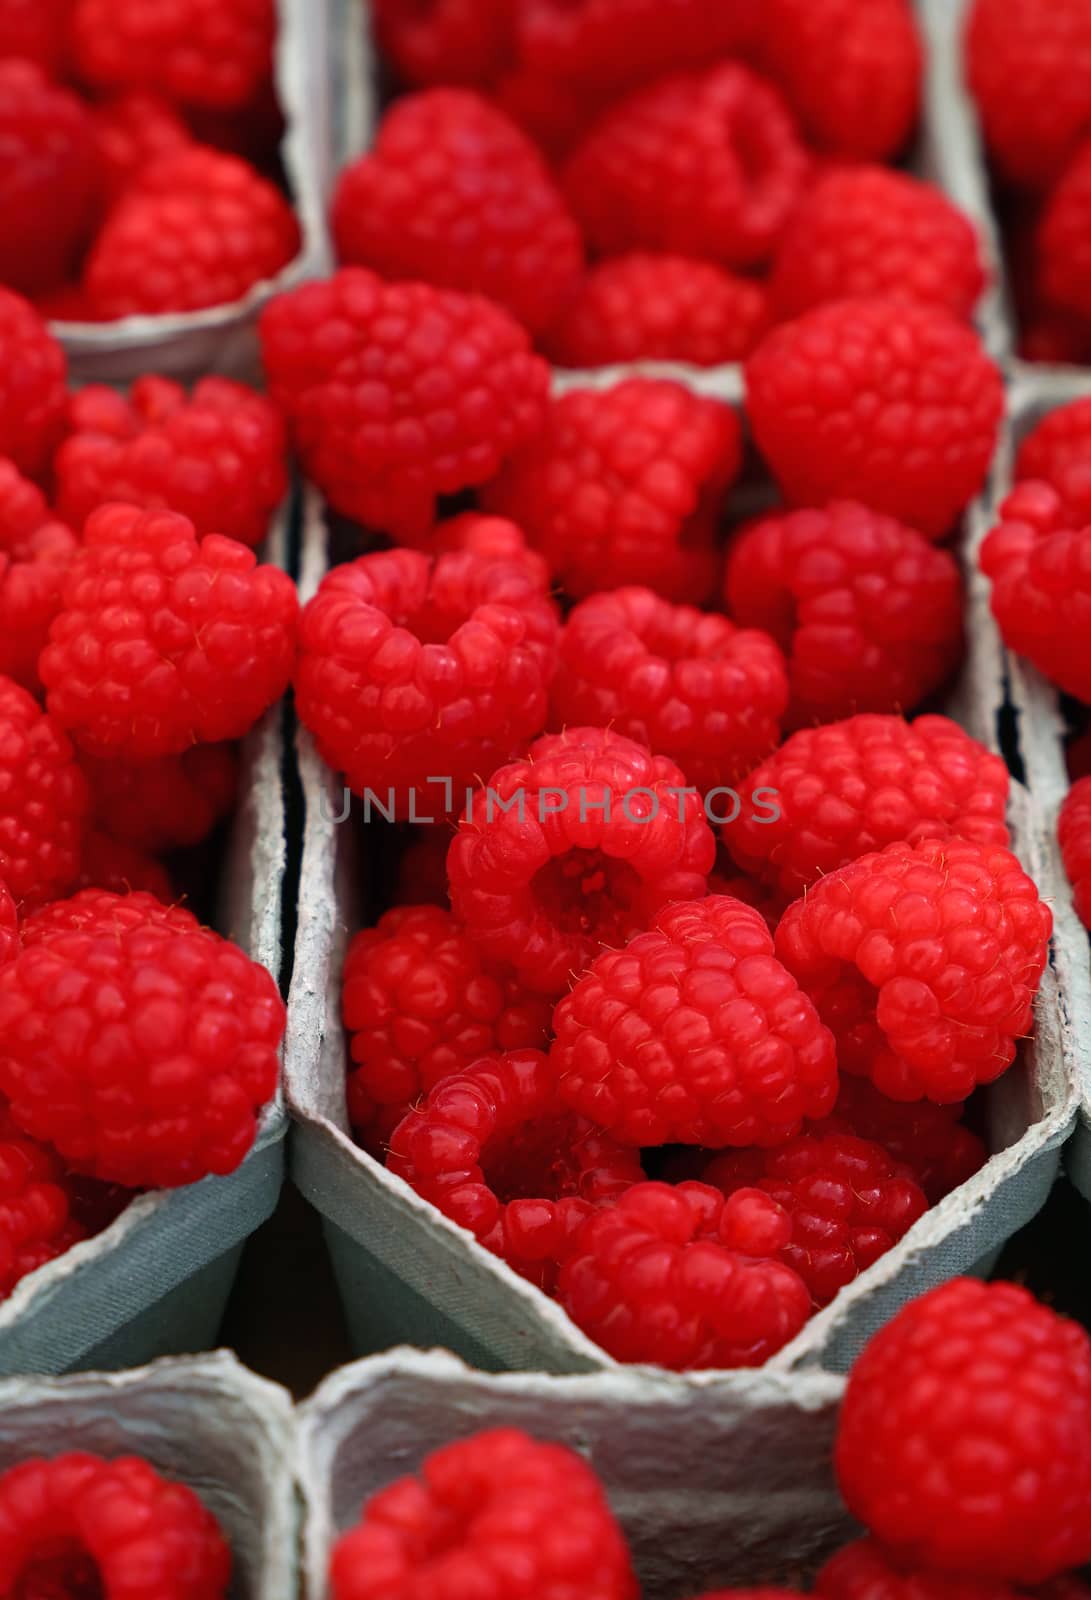 Close up red ripe raspberry on retail display by BreakingTheWalls